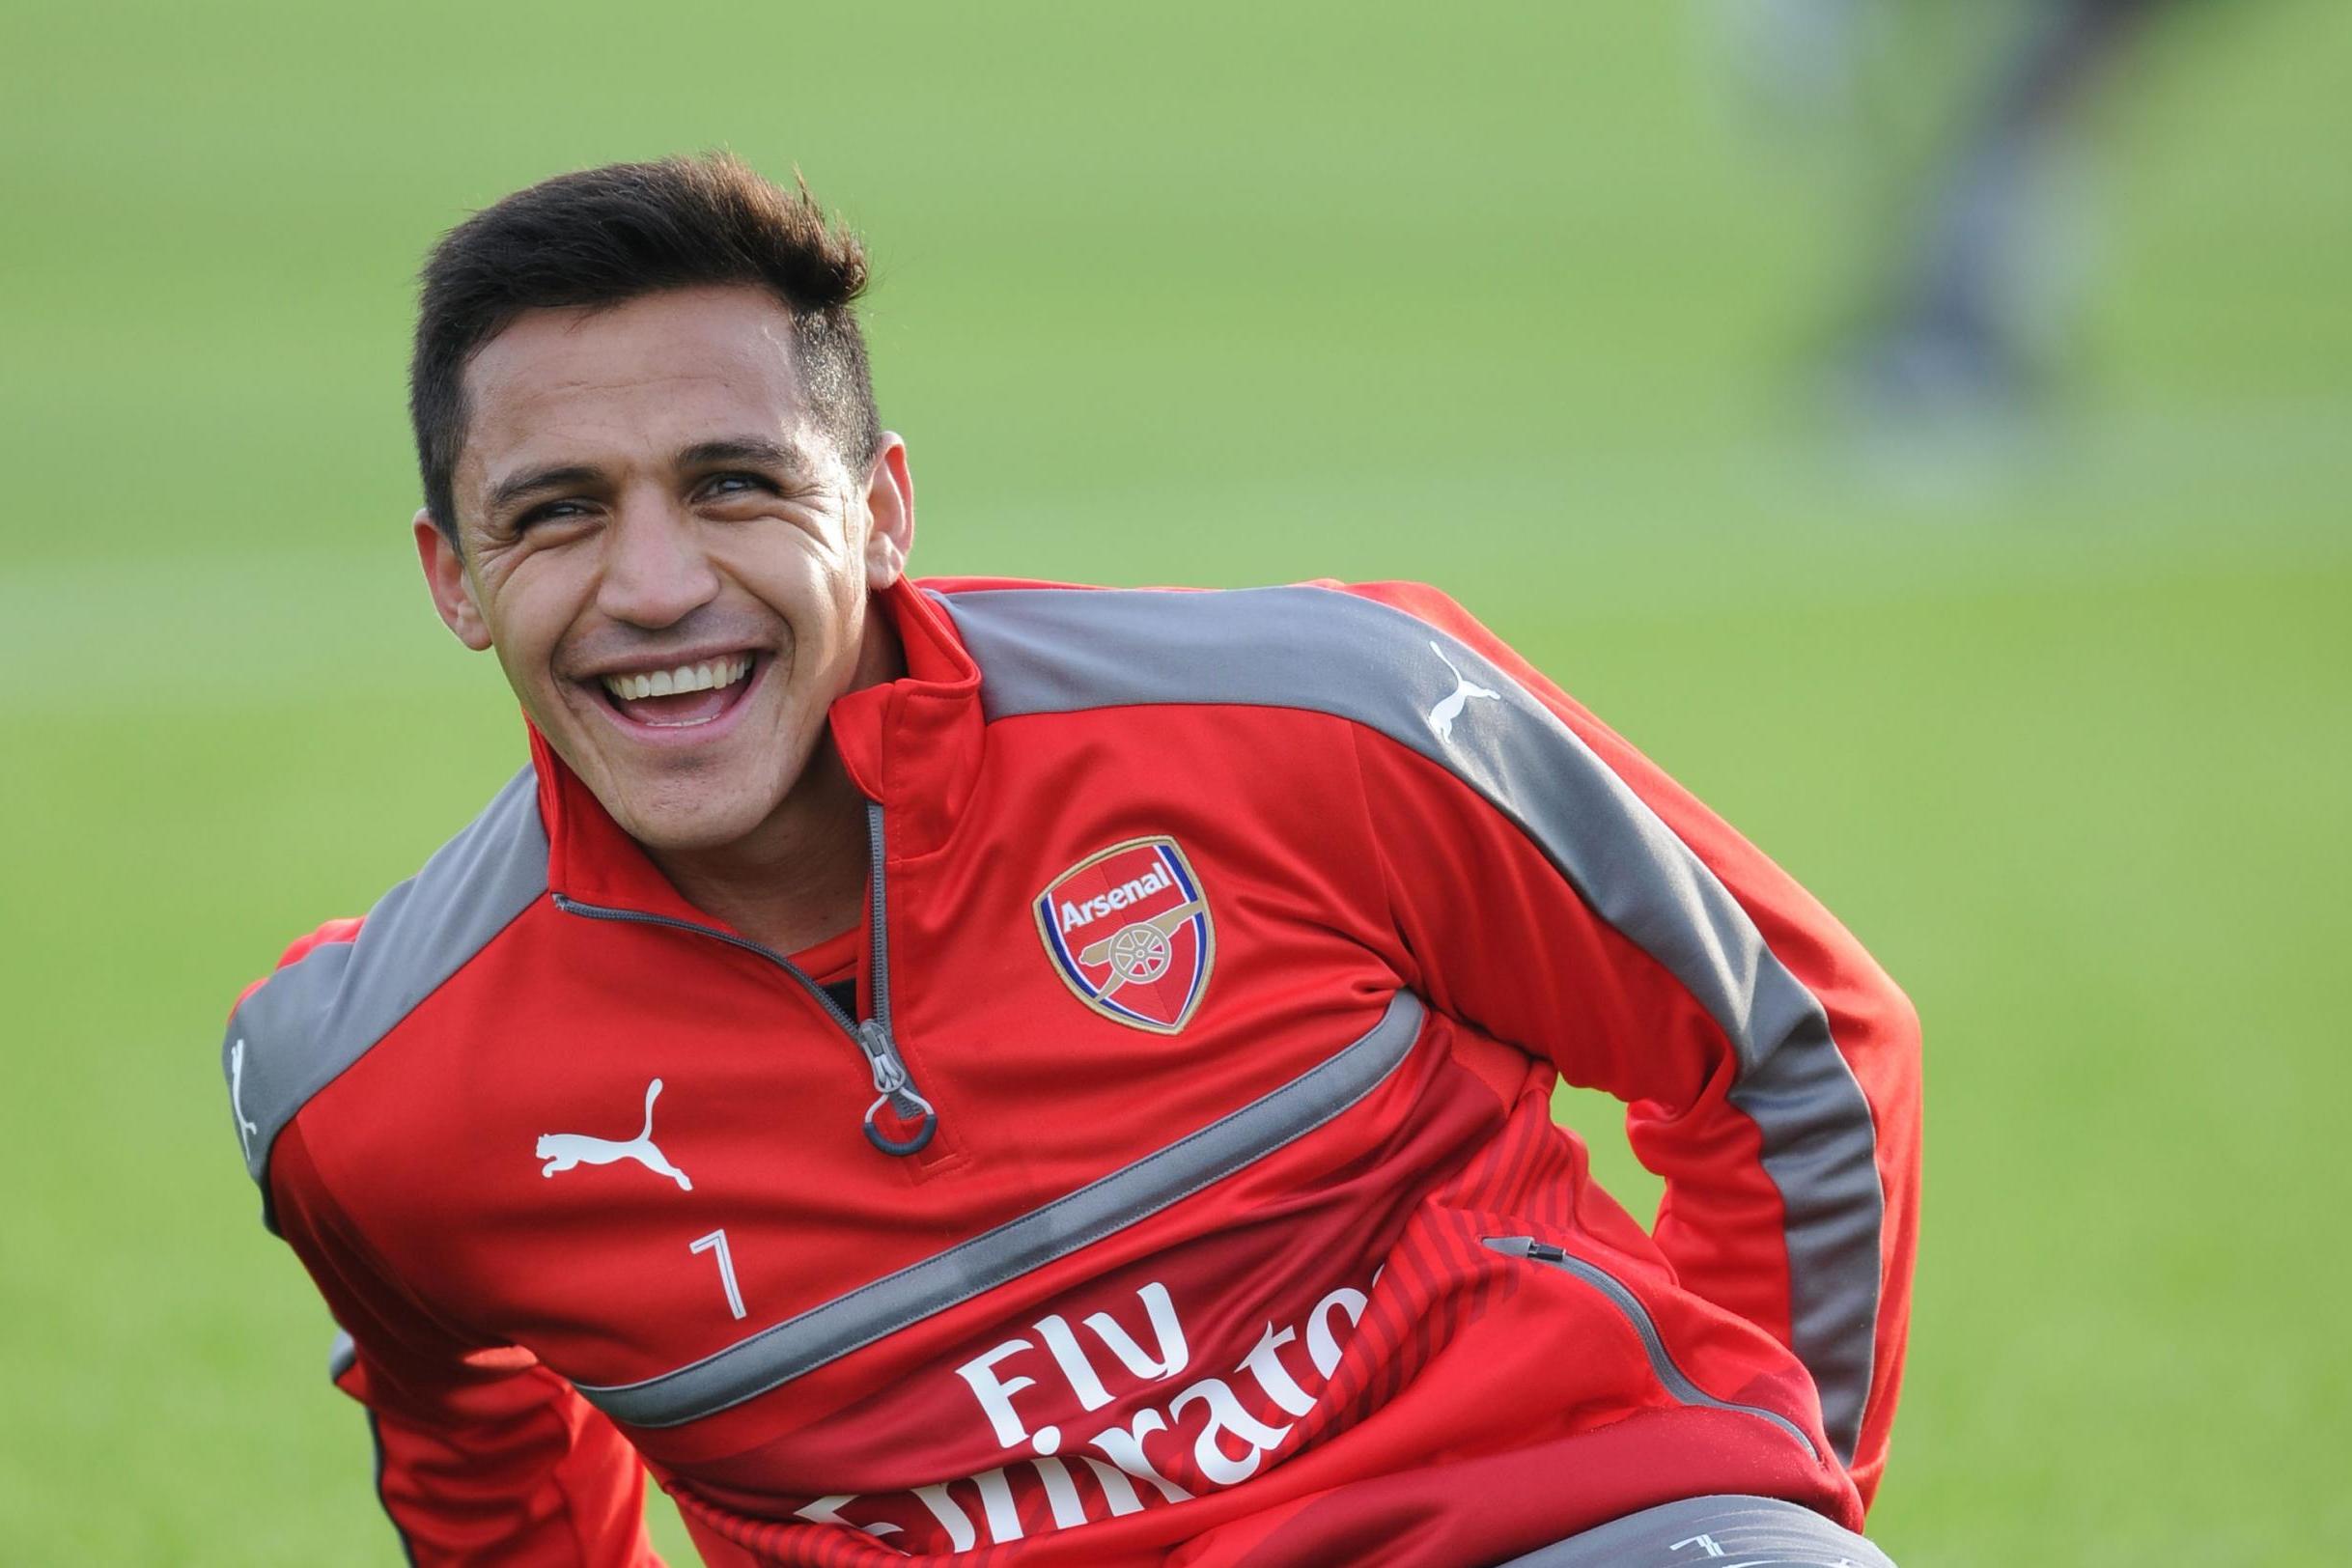 Alexis Sanchez saga set to be most interesting of January window, with both Manchester clubs 